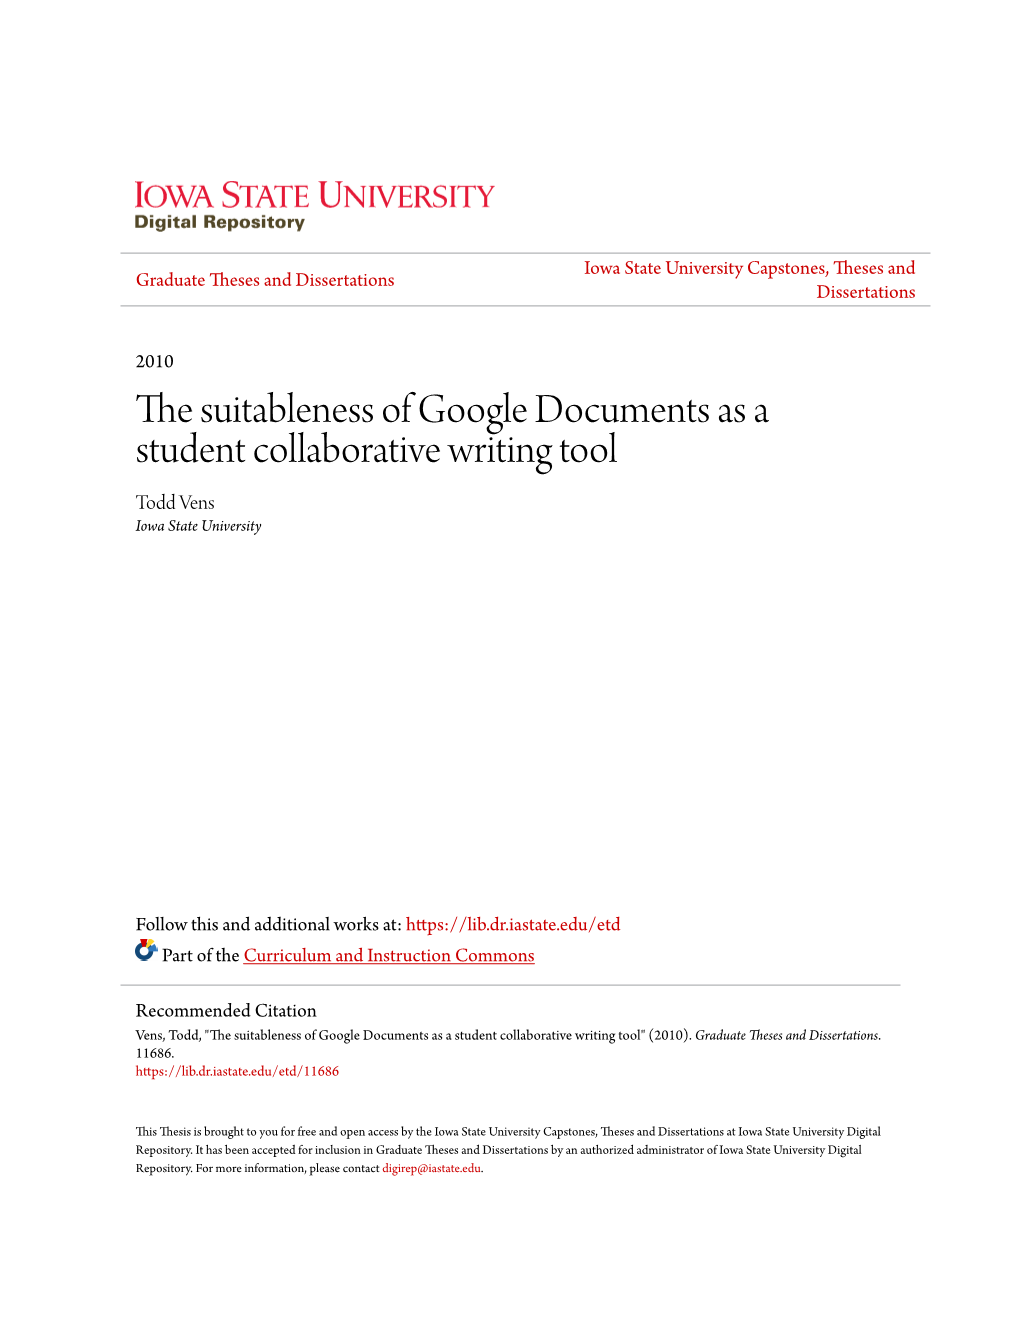 The Suitableness of Google Documents As a Student Collaborative Writing Tool